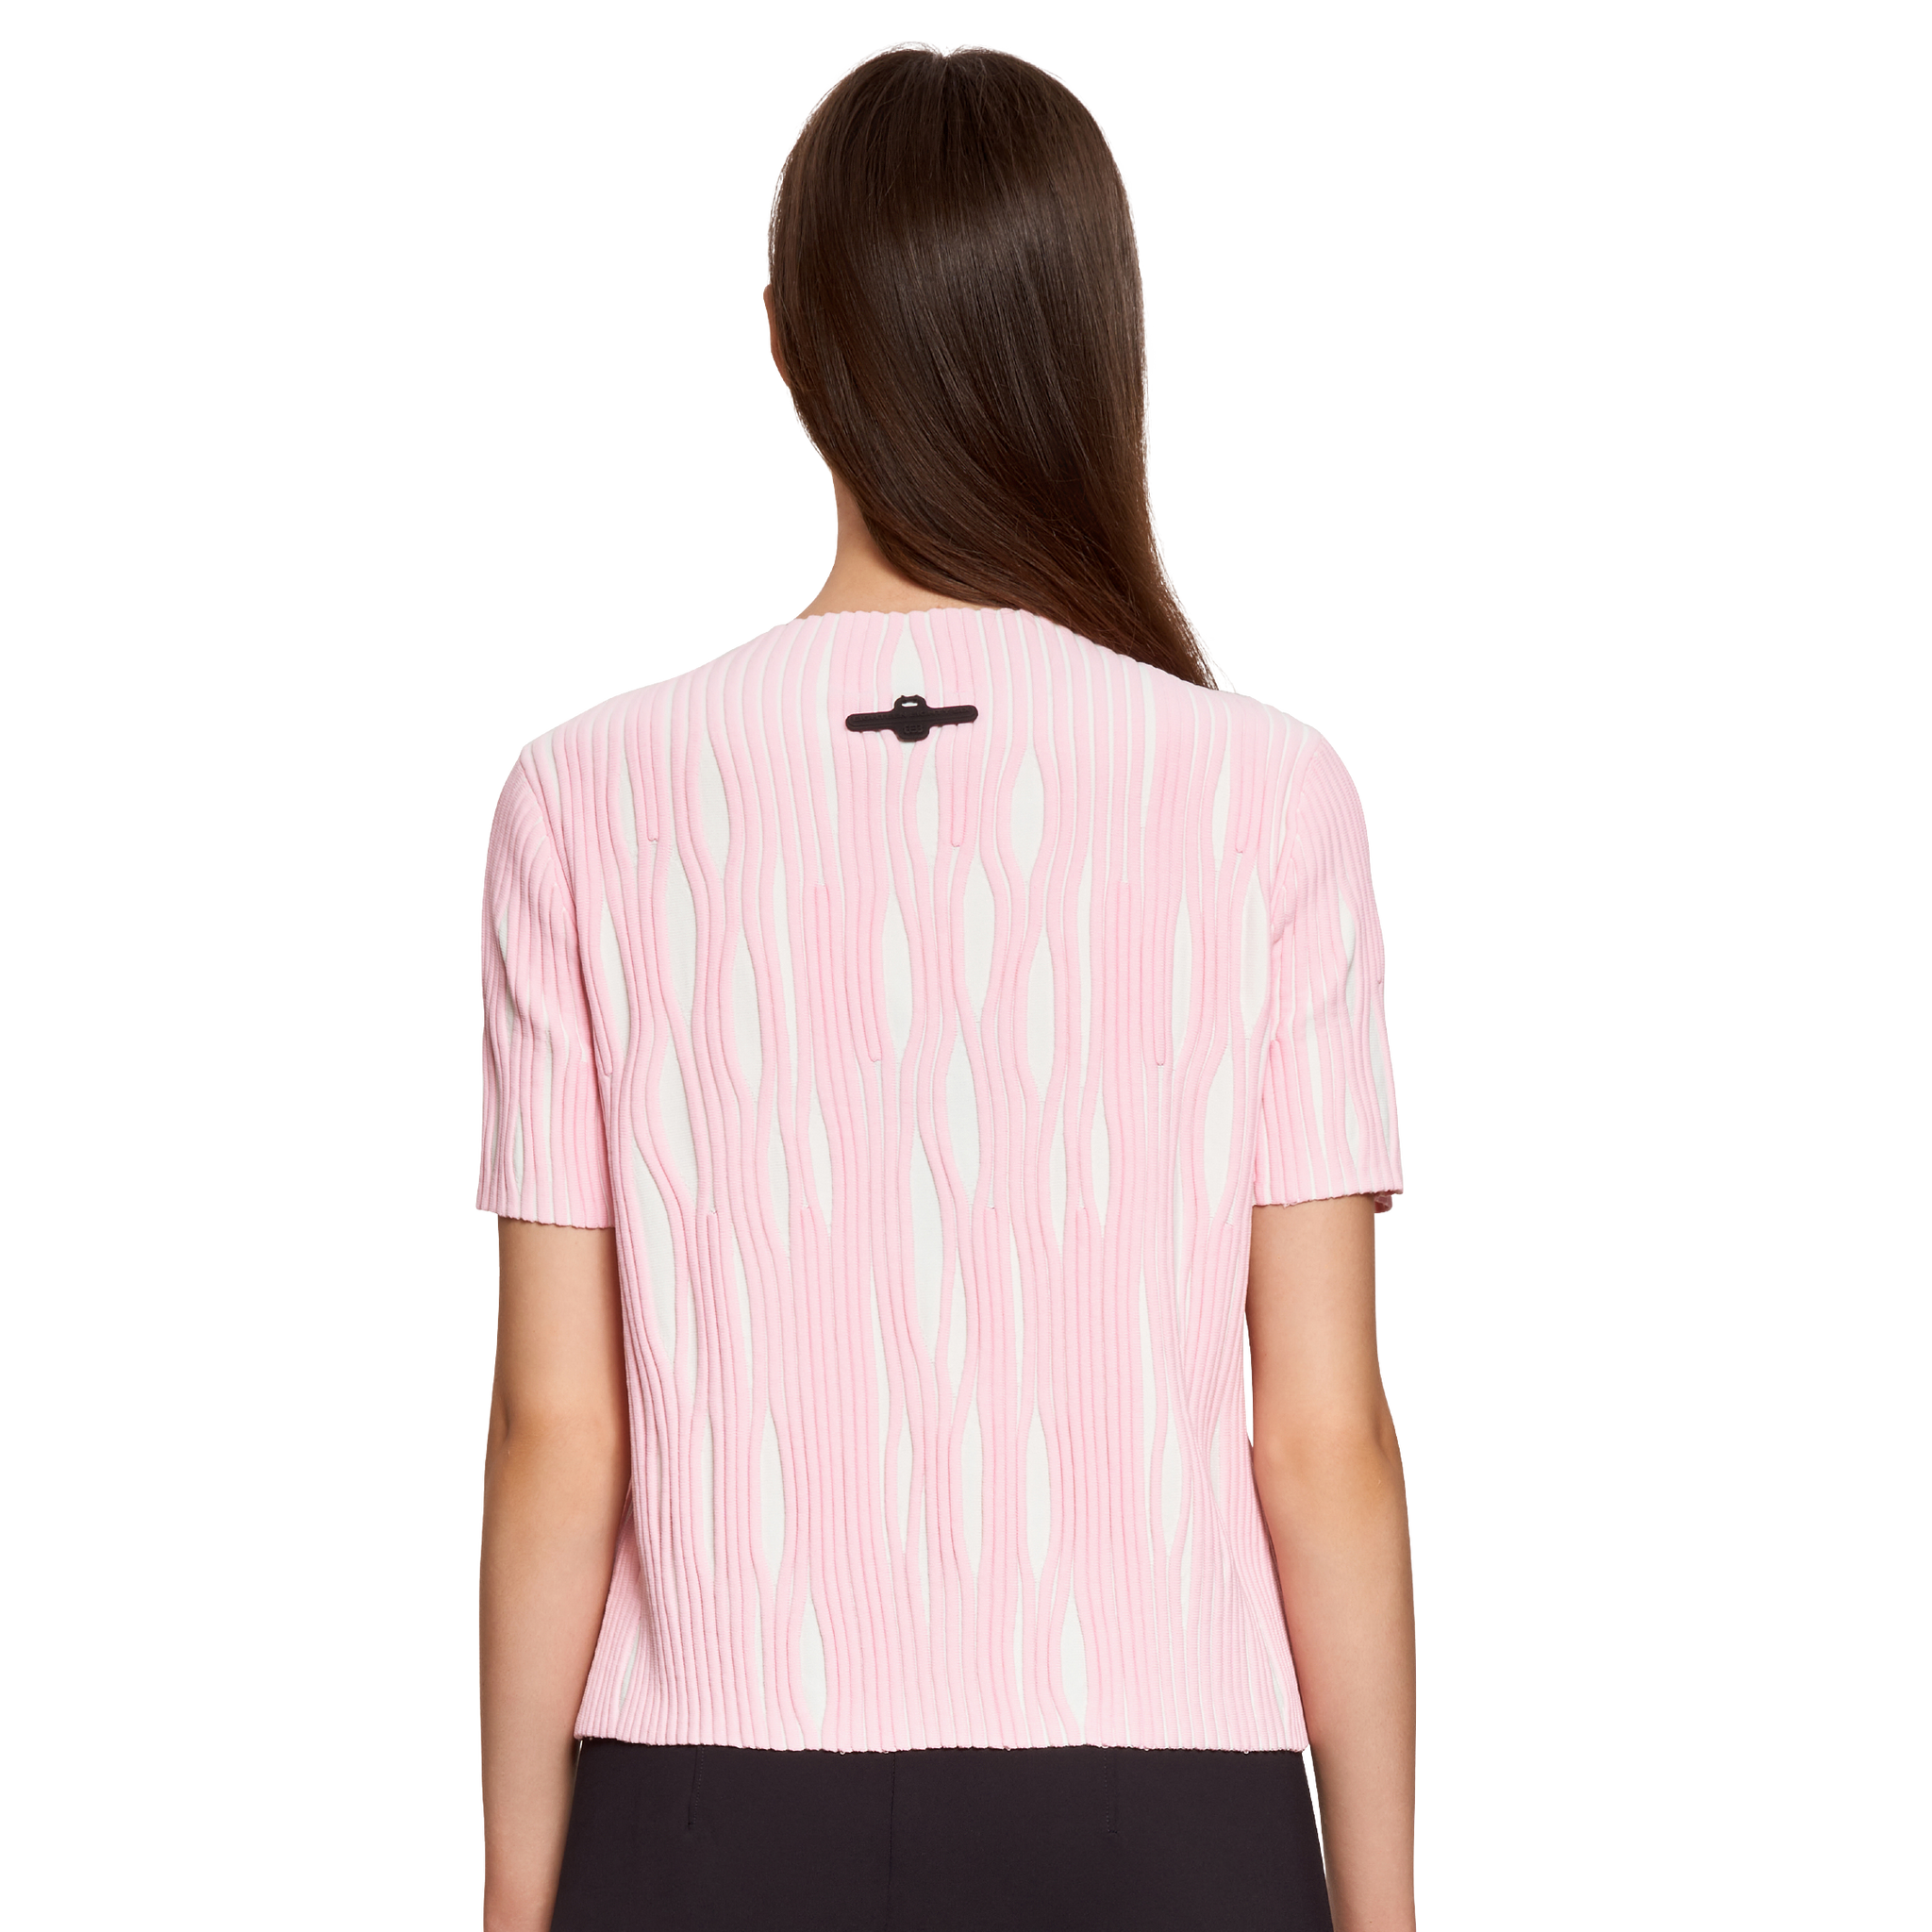 Fitted textured top - White & Pink